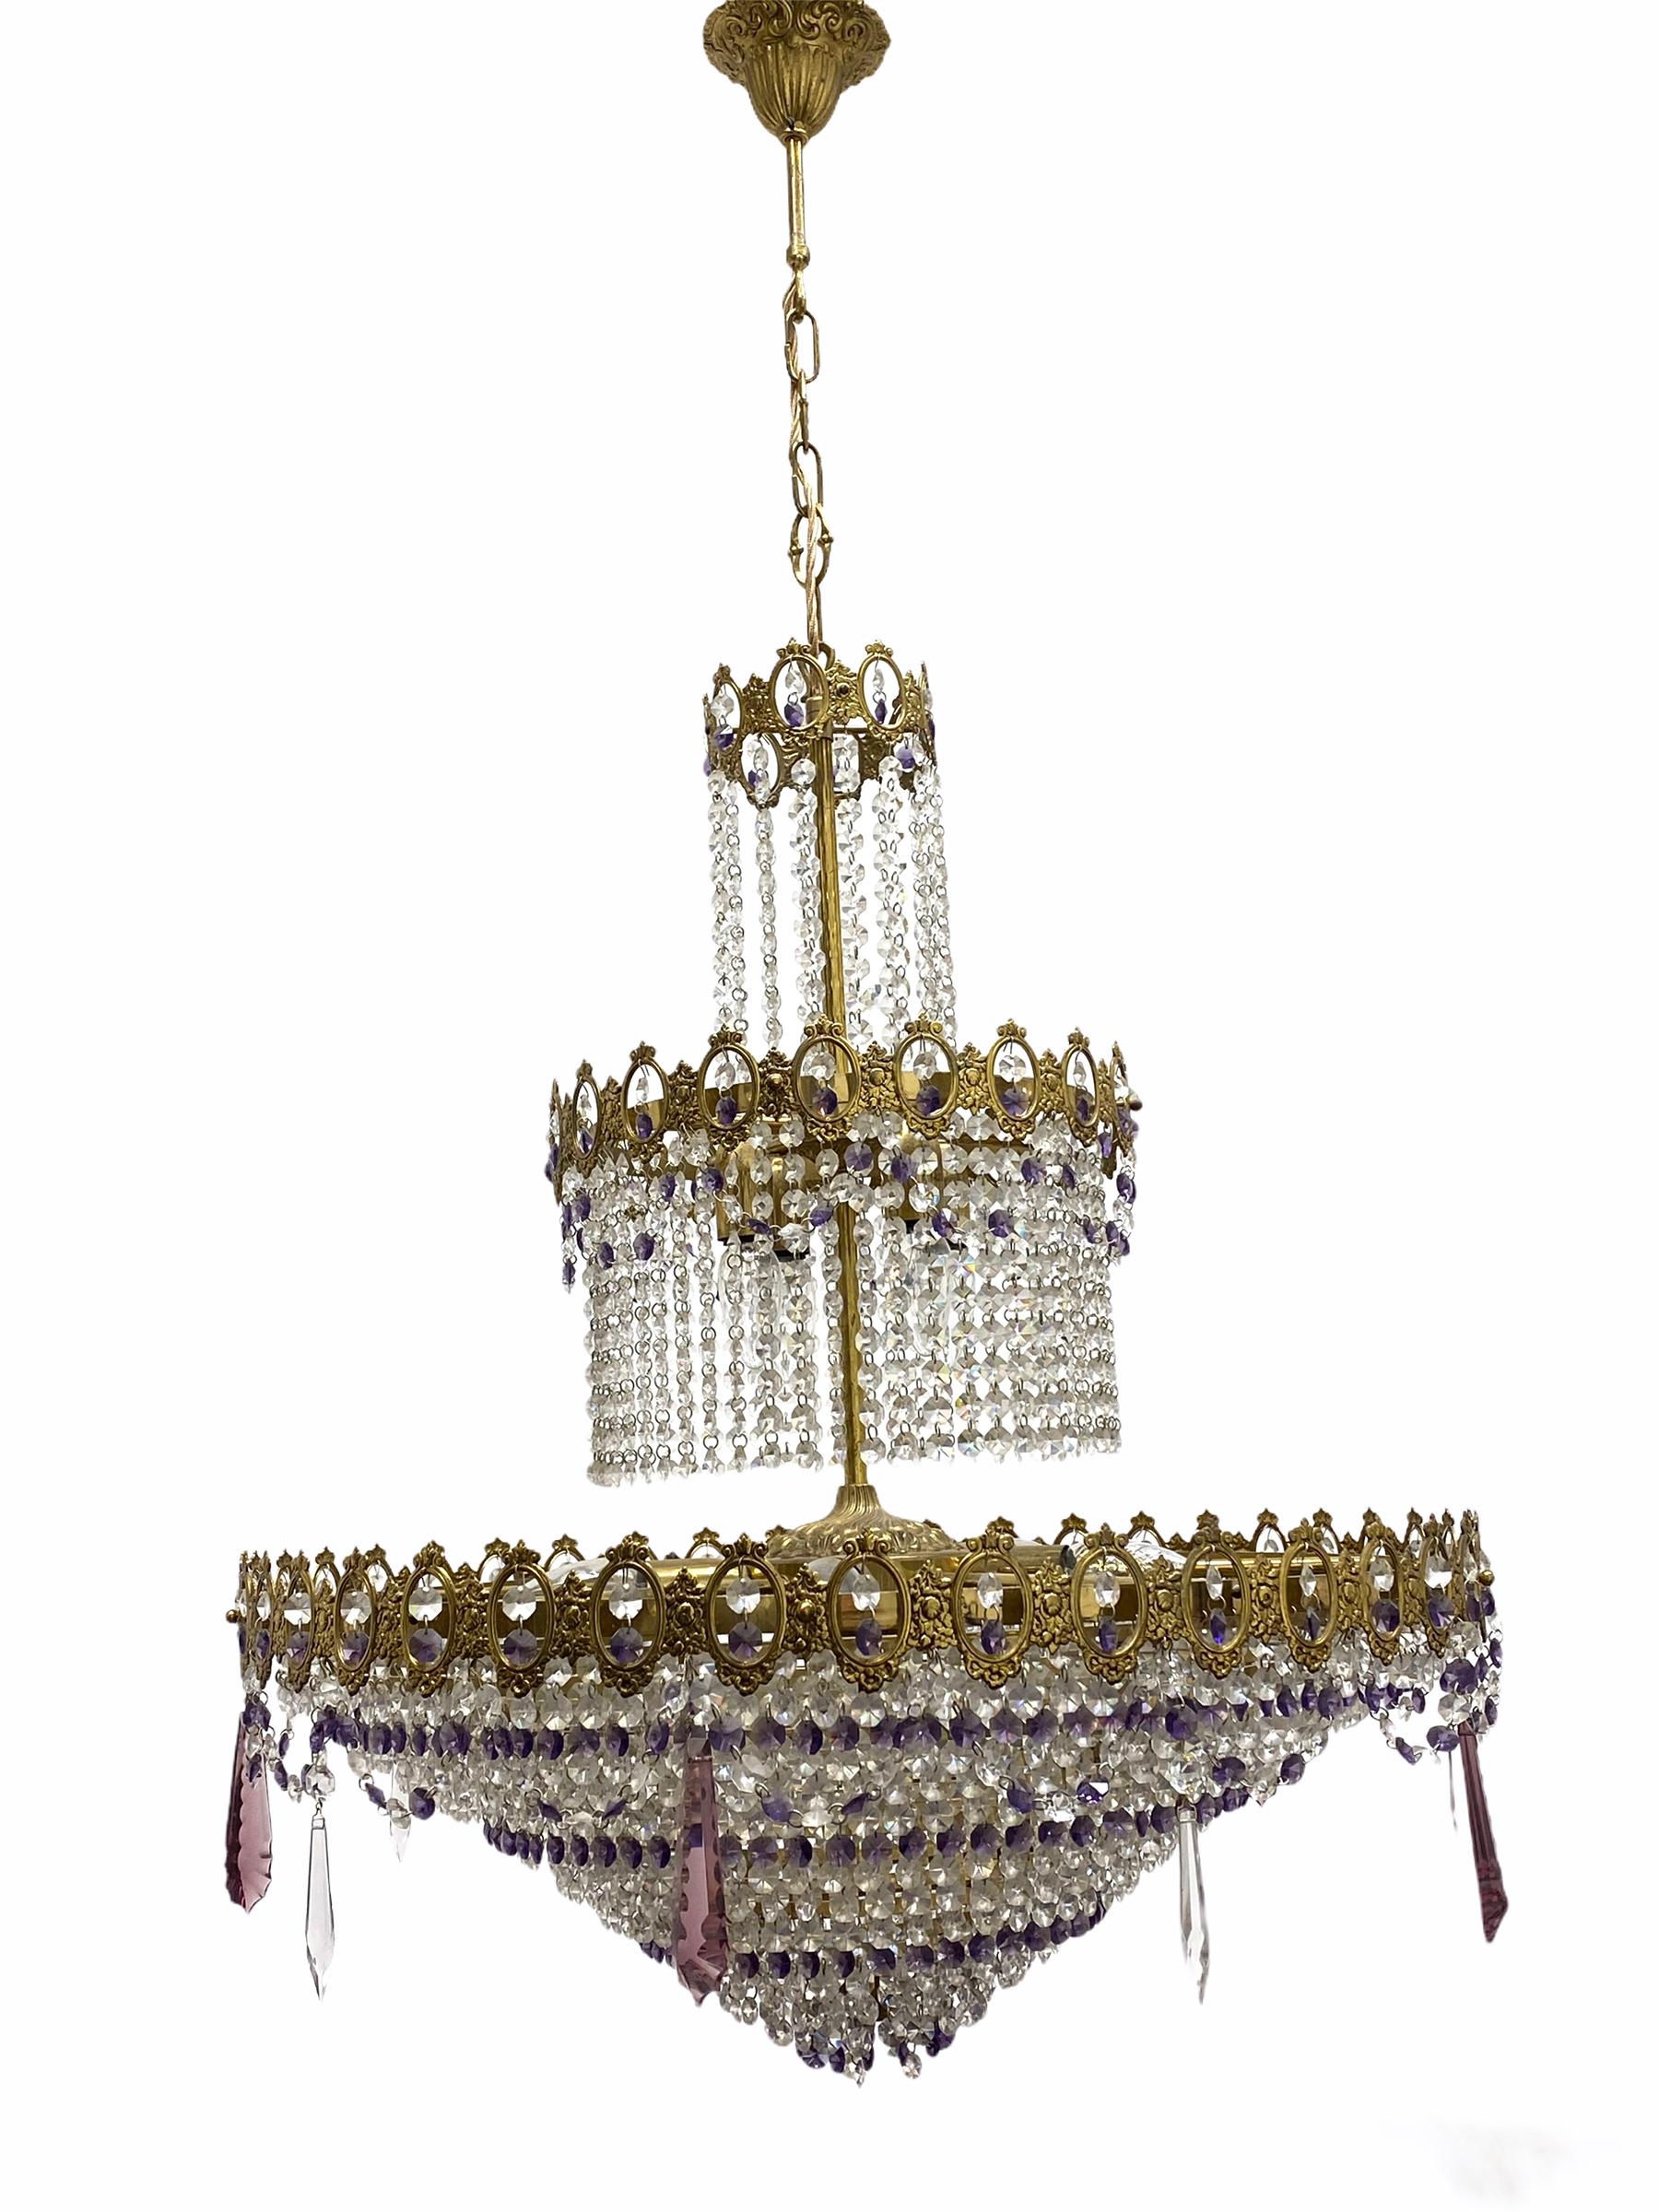 Monumental Empire Style Bronze and Crystal Chandelier, Austria, 1930s For Sale